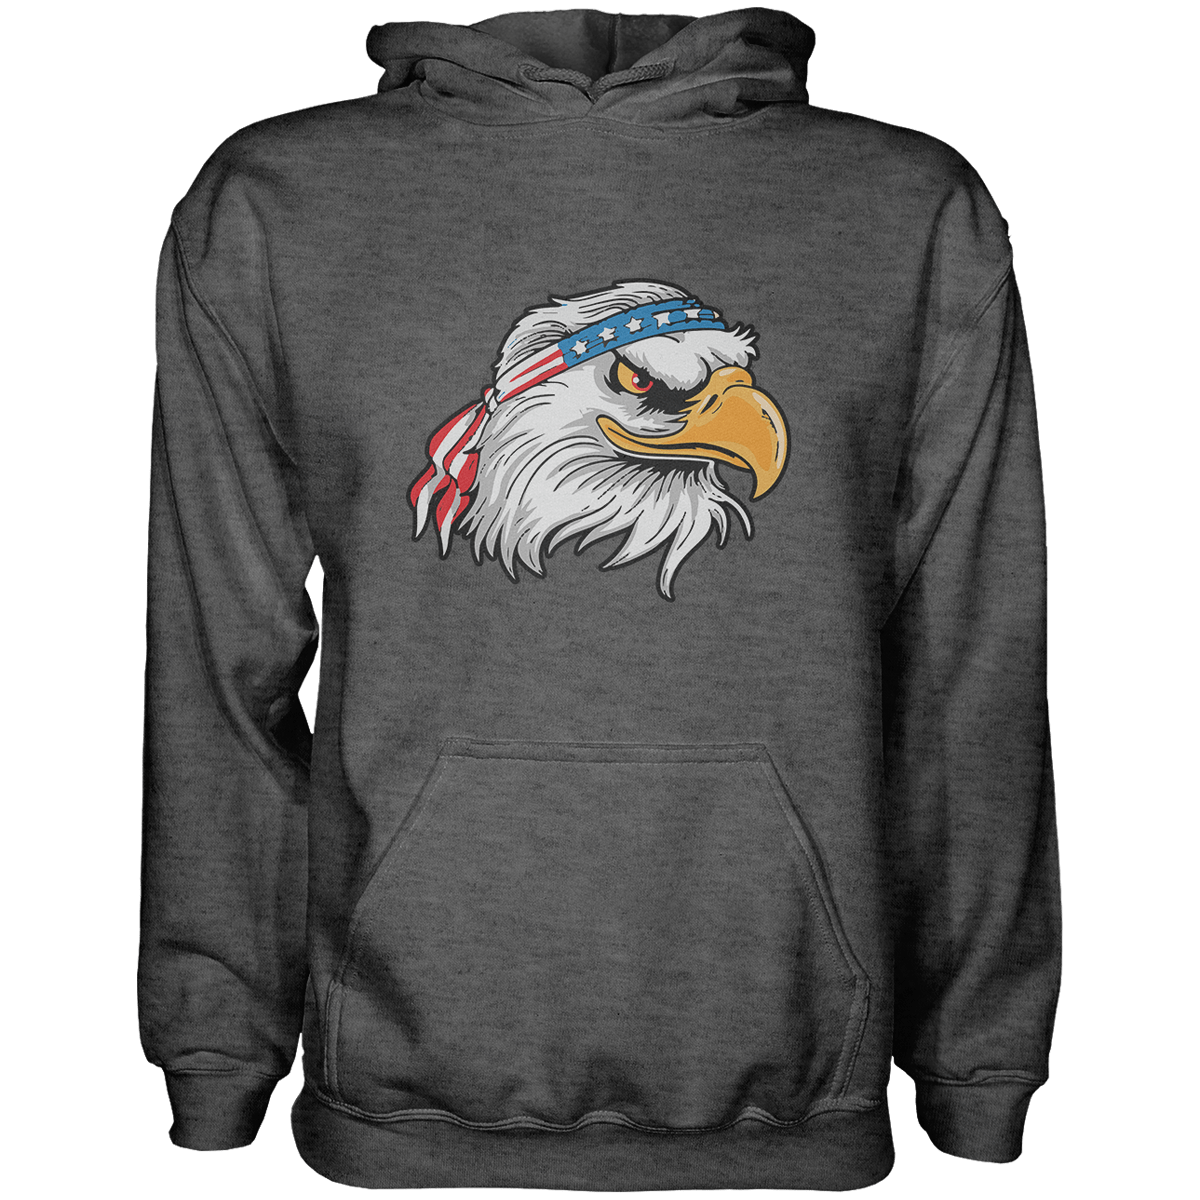 Thumbnail for Merican Eagle Hoodie - Greater Half